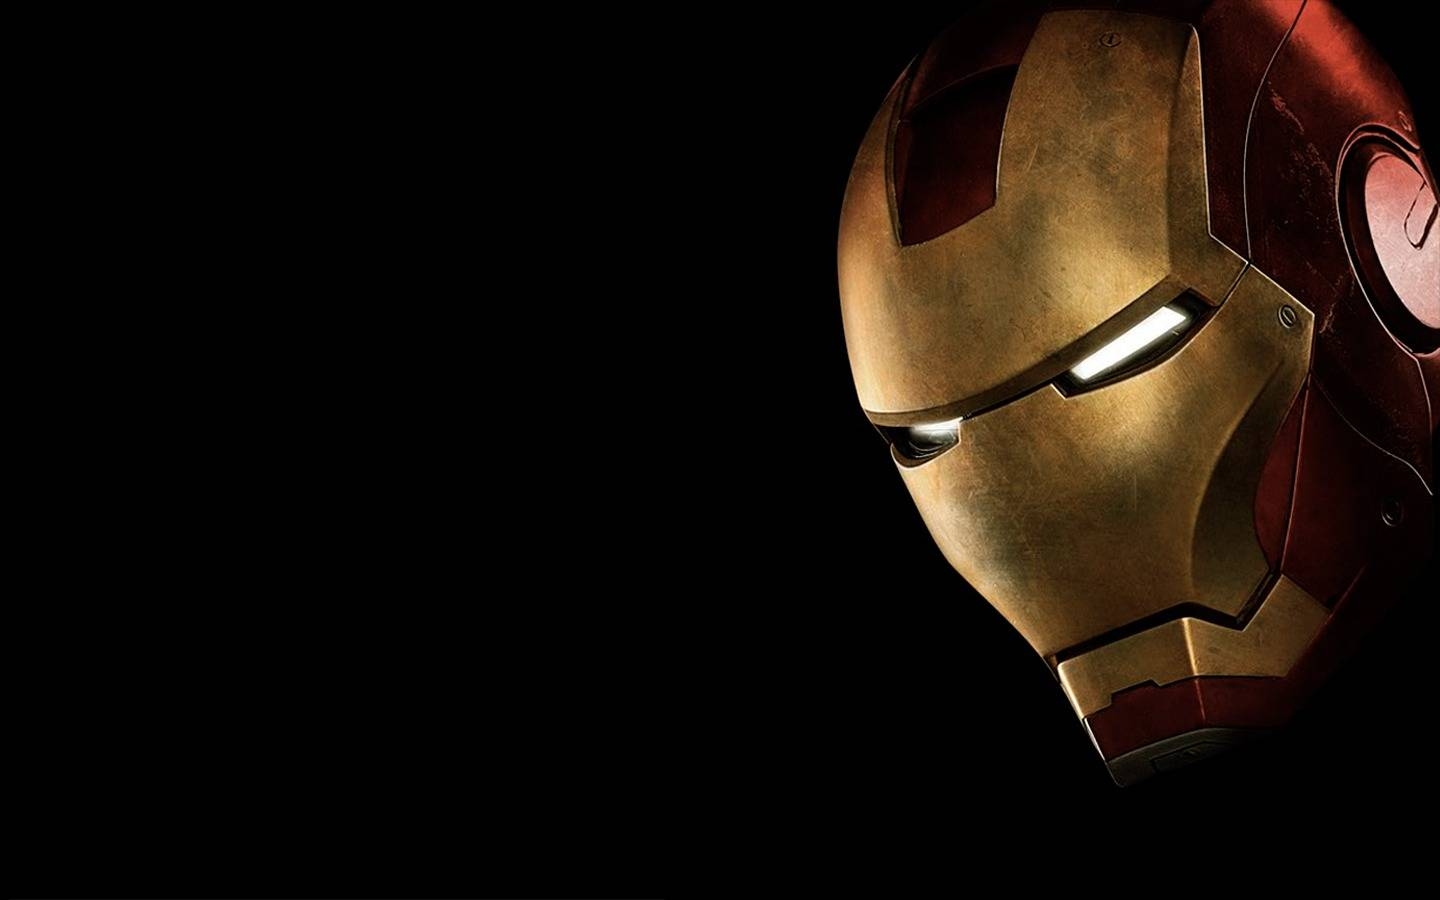 ironman 3 wallpaper hd android - Androidwallpaper